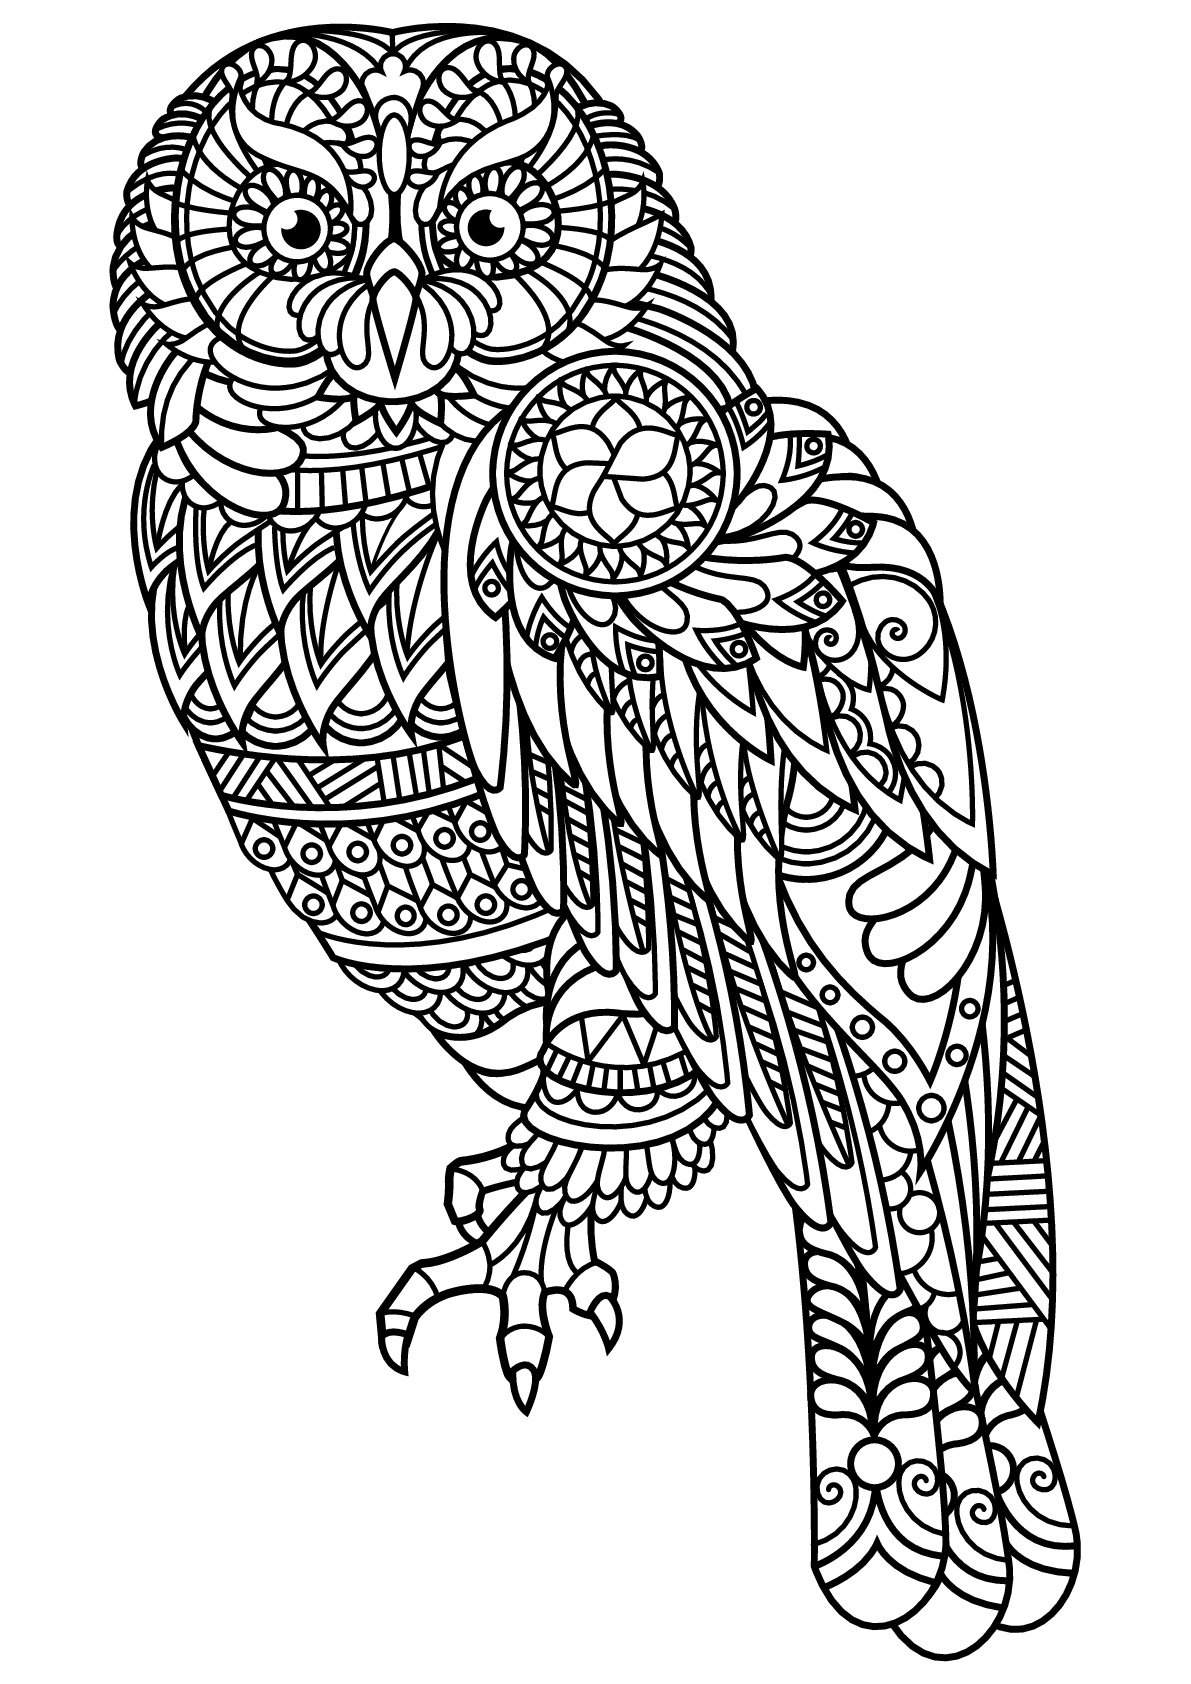 Color this owl and all its patterns. Owls have the ability to rotate their head up to 270 degrees, which is about 3/4 of a complete circle. This gives them the ability to see almost all around them without having to move their body.